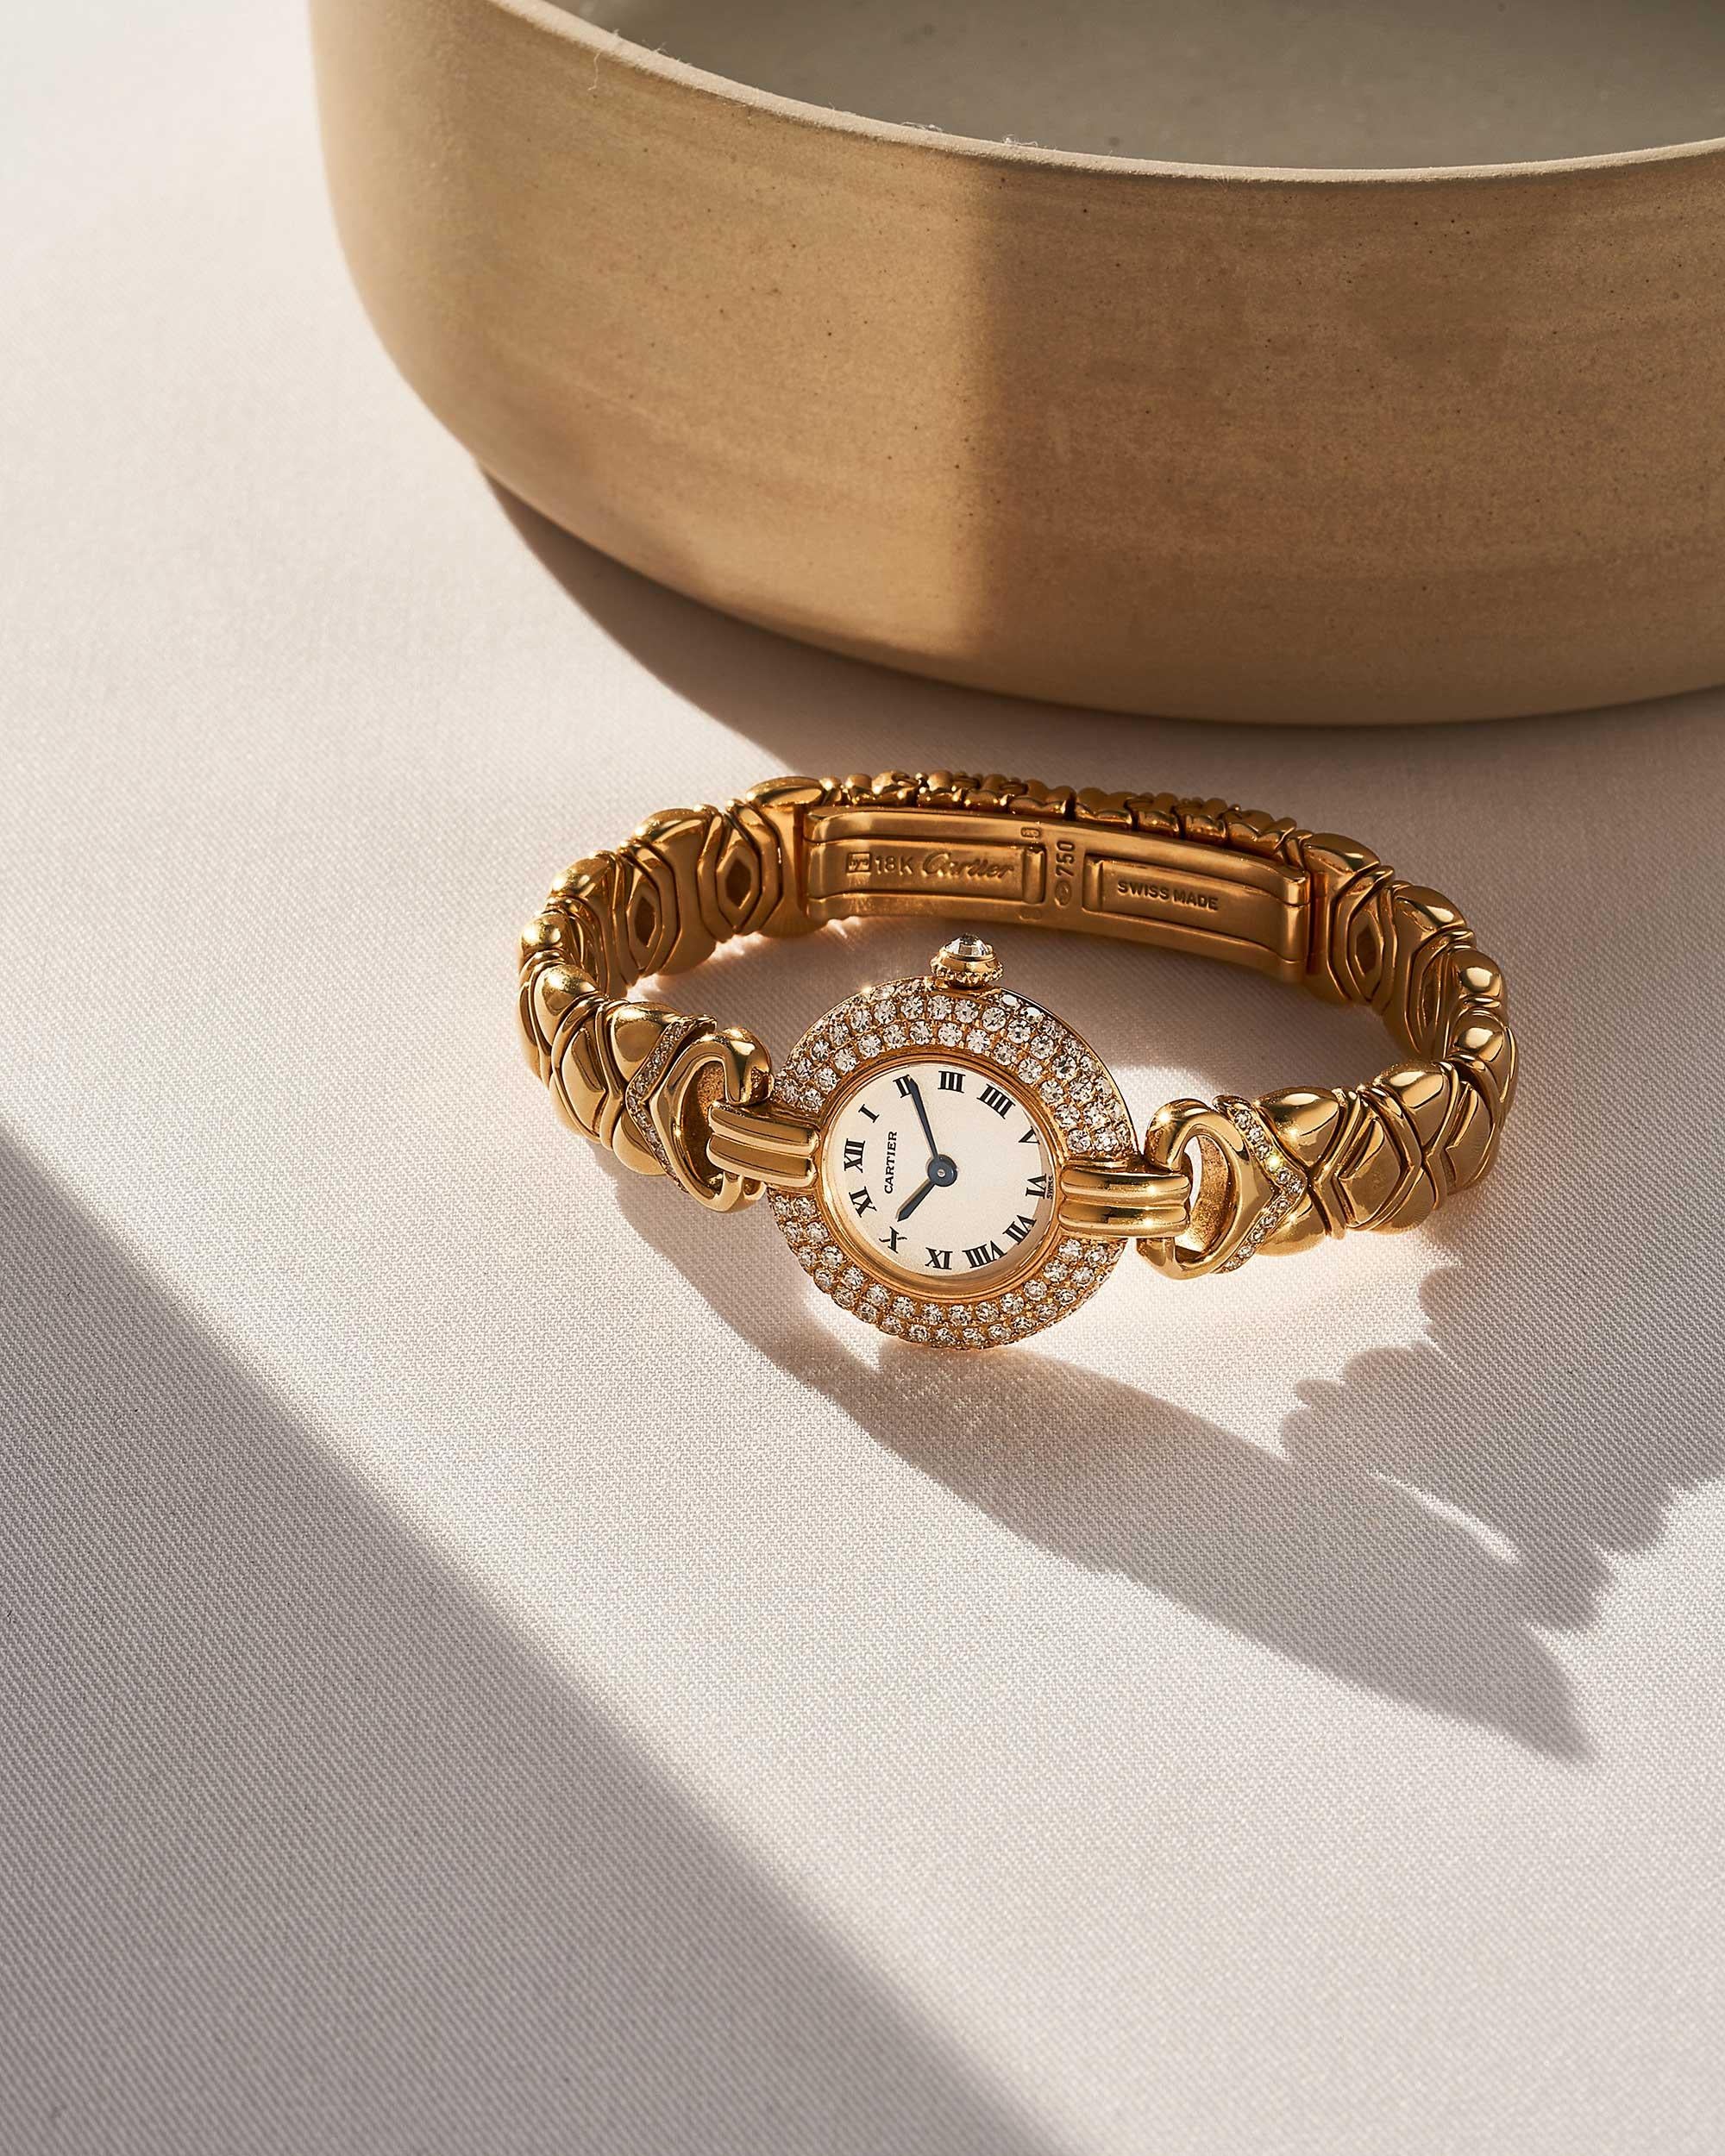 Cartier Tortue Ladies Watch with Diamond Bezel
Reference: WB 021 HG
Material: Yellow gold
Movement: Quartz
Diameter: 24mm
Dial: White
Bracelet: Yellow Gold
Diamonds: Original Cartier
Accessoires: Box and copy of the Cartier Certificate from 1991